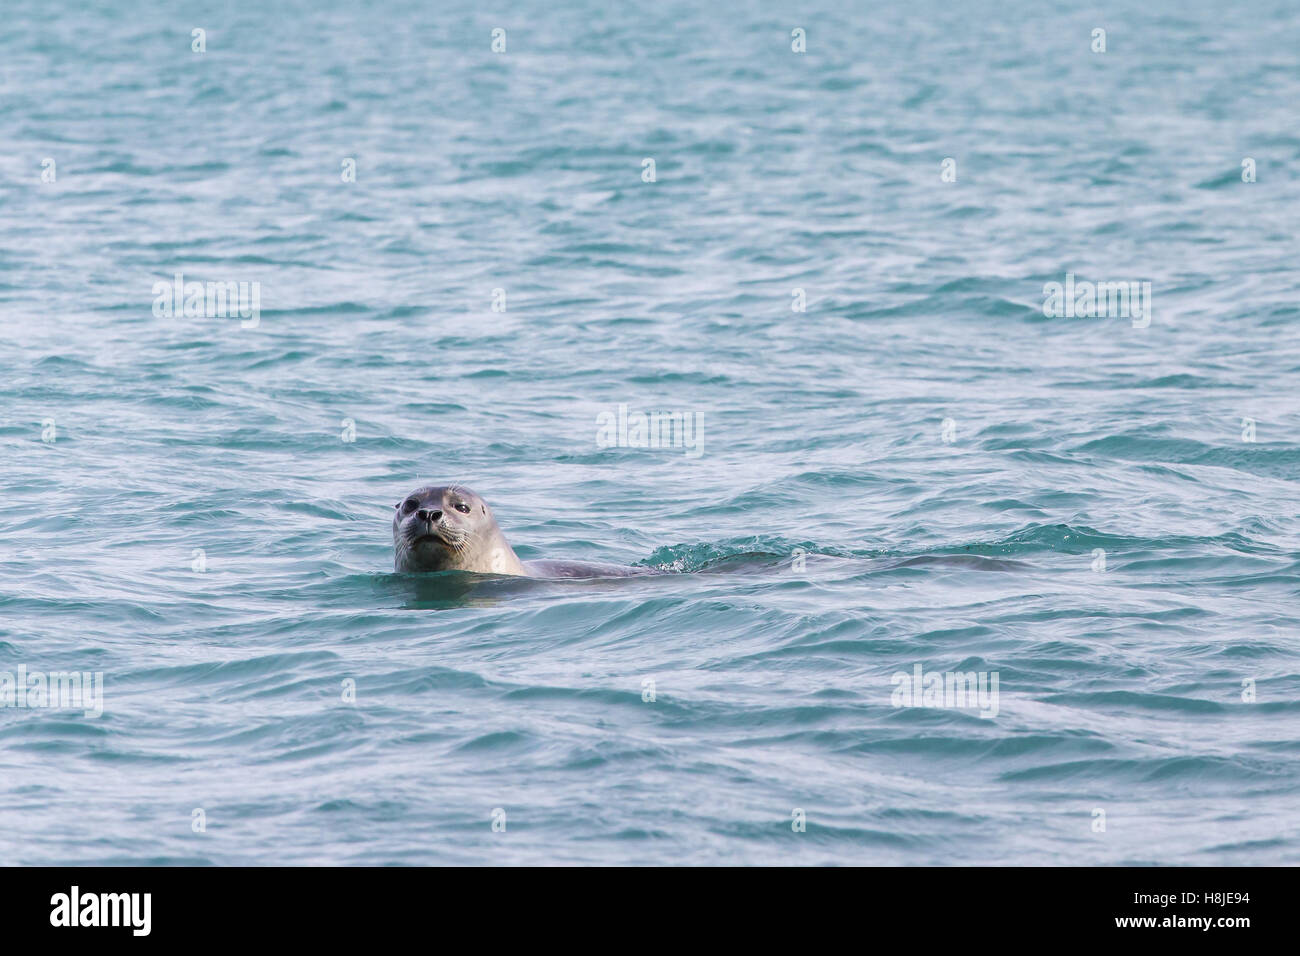 Seal swimming in blue water. Frontal view of head emerging above the water surface with eye contact, one eye half closed. Stock Photo